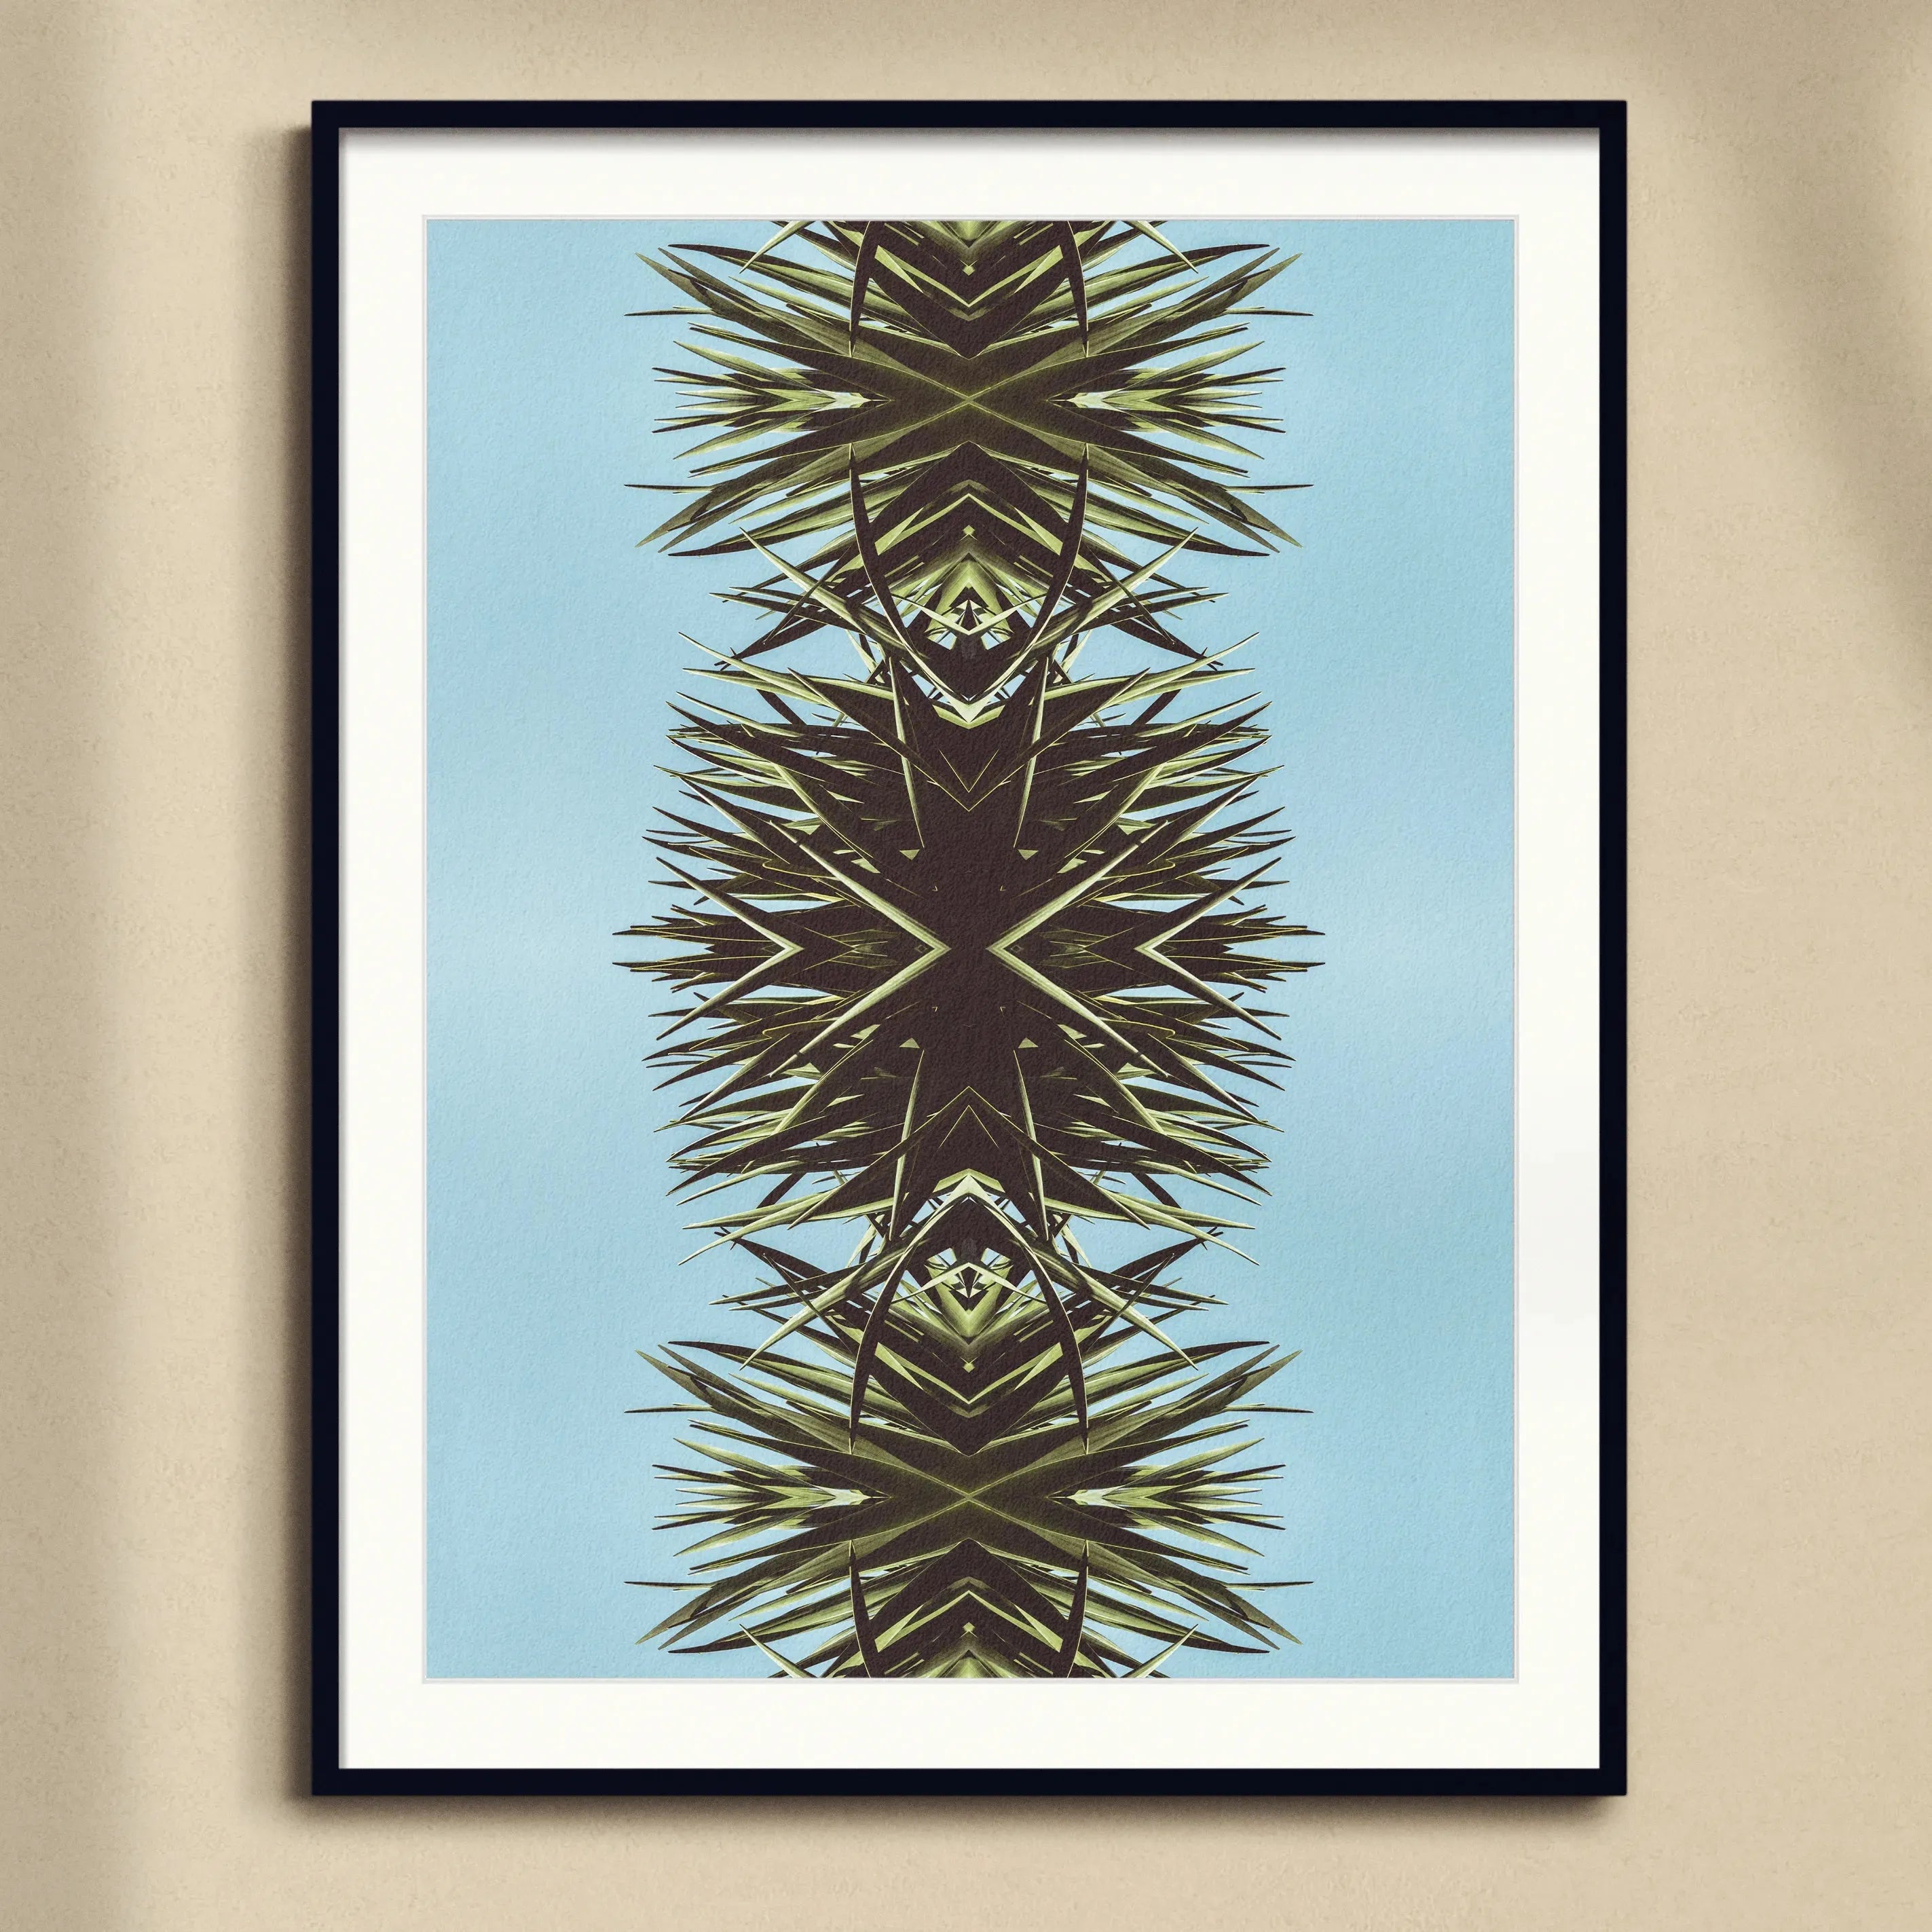 Pointy Framed & Mounted Print - Posters Prints & Visual Artwork - Aesthetic Art